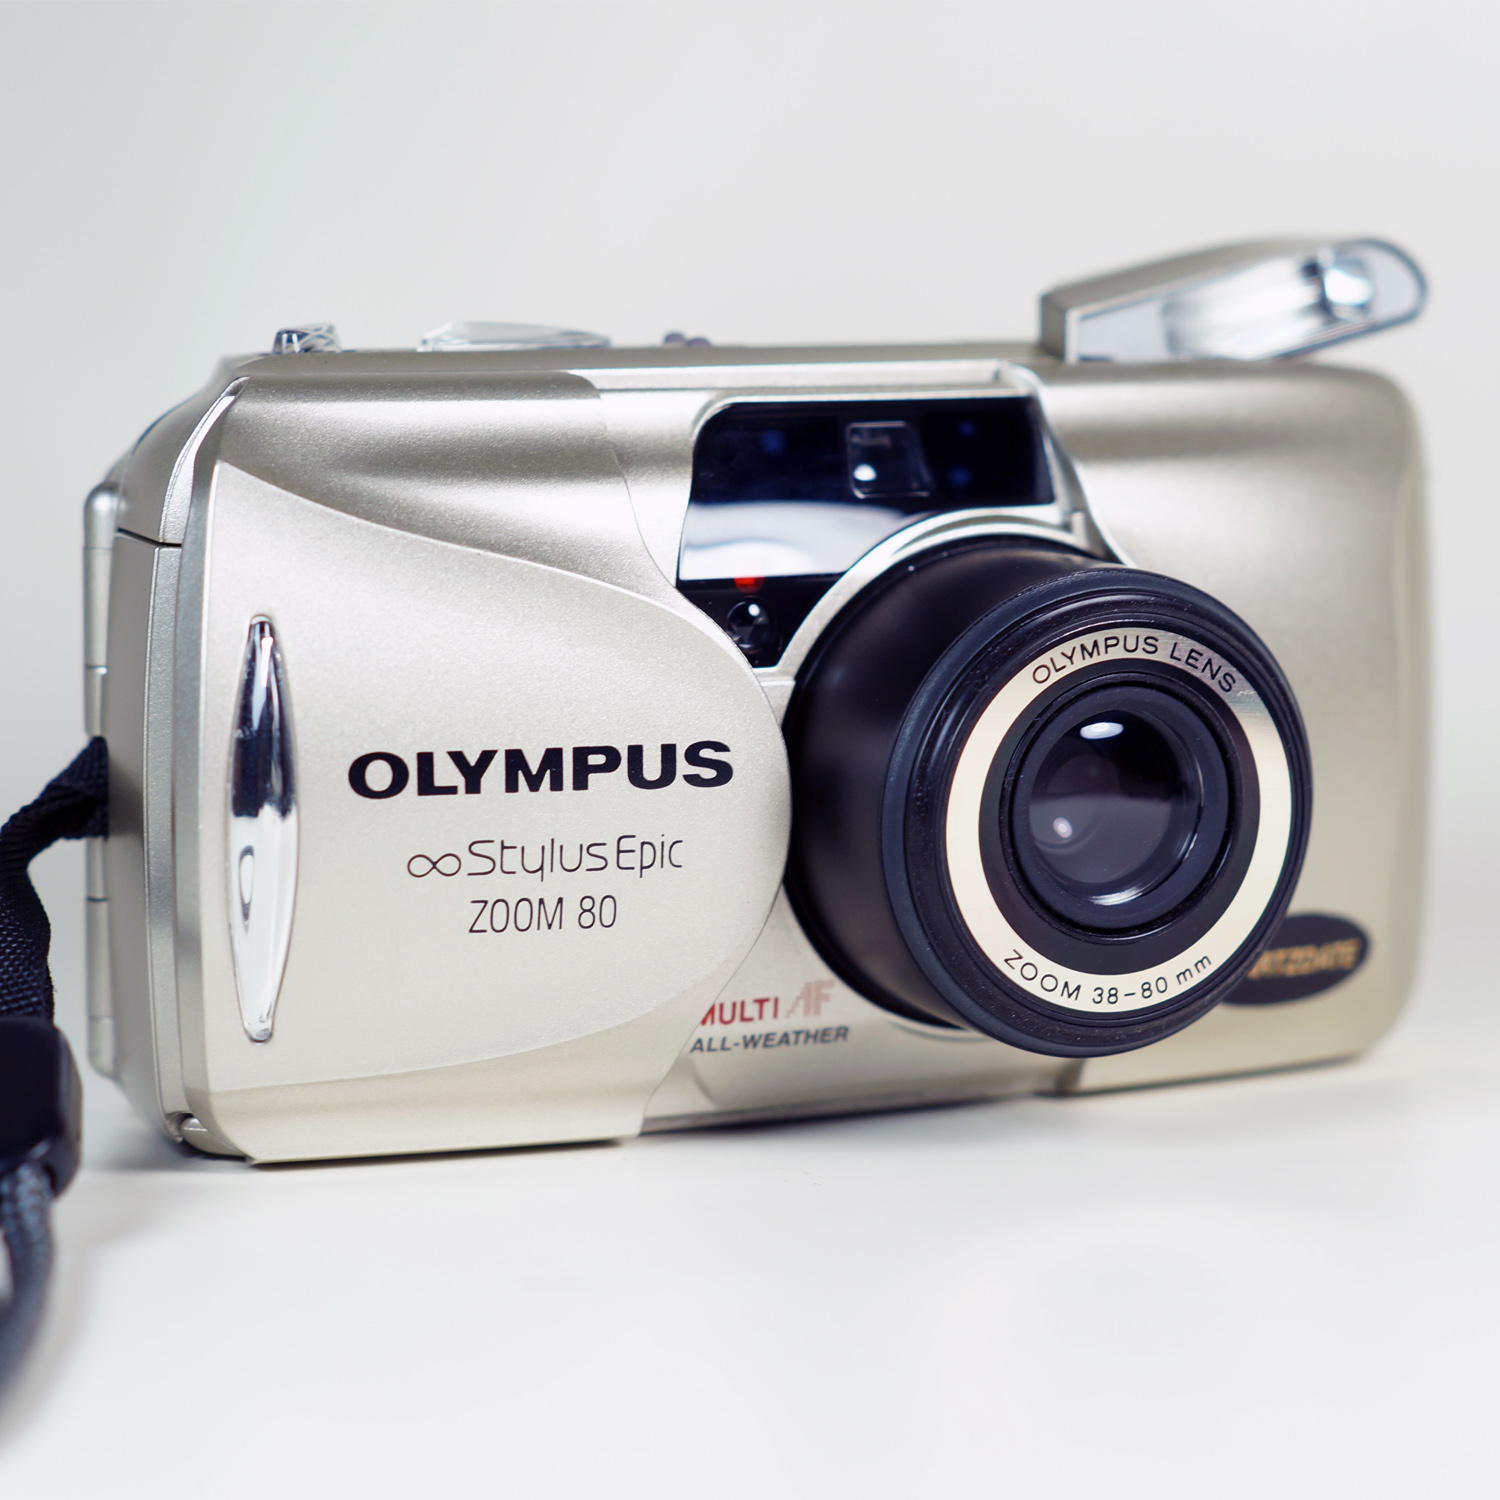 Olympus Stylus Epic Zoom 80 QD All Weather 35mm Point & Shoot Film Camera